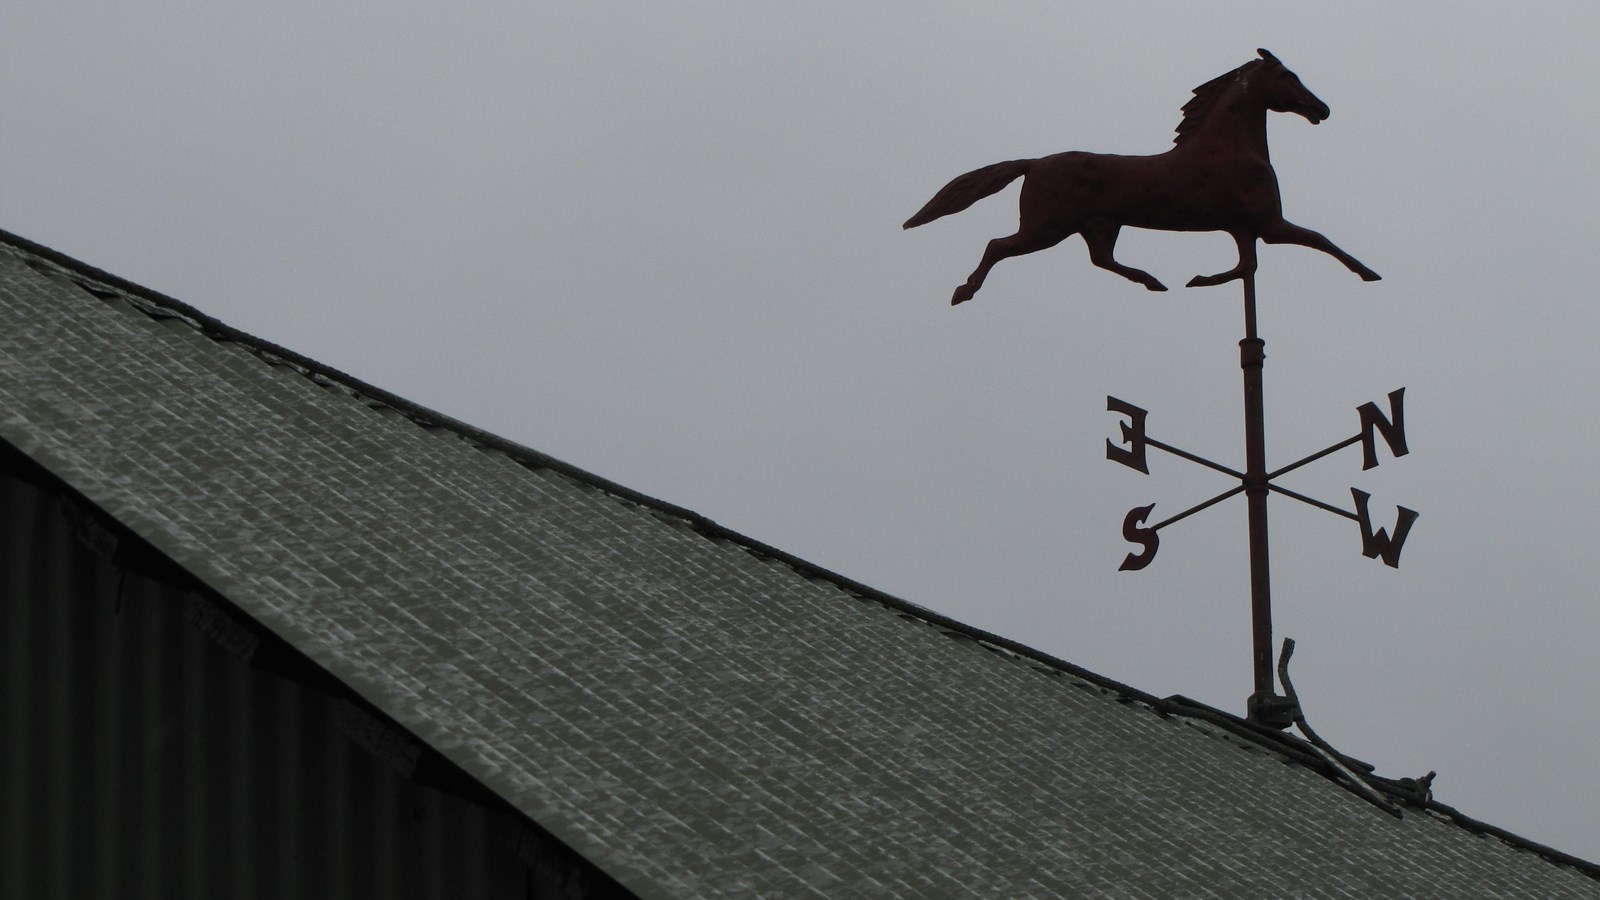 A red horse weather vane sits atop a dark green rooftop.